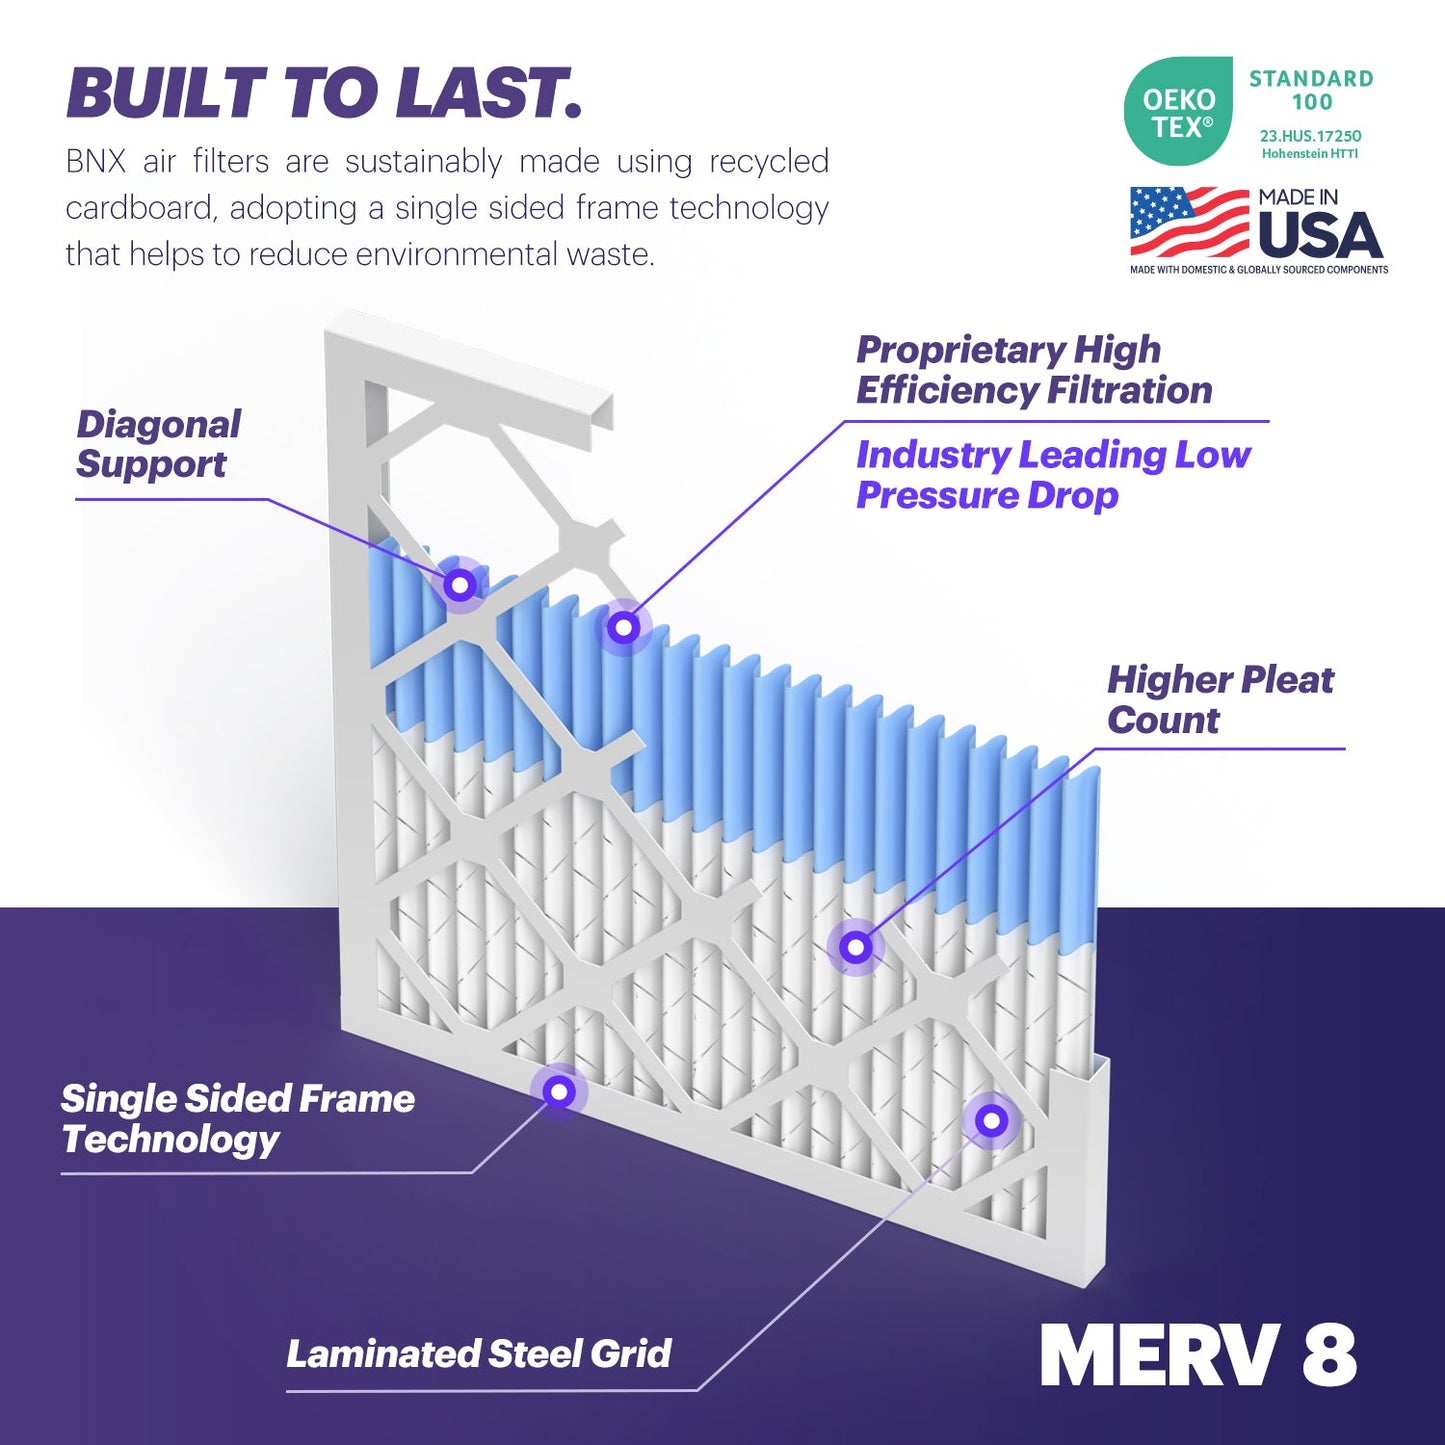 BNX TruFilter 20x22x1 MERV 8 Pleated Air Filter – Made in USA (6-Pack)